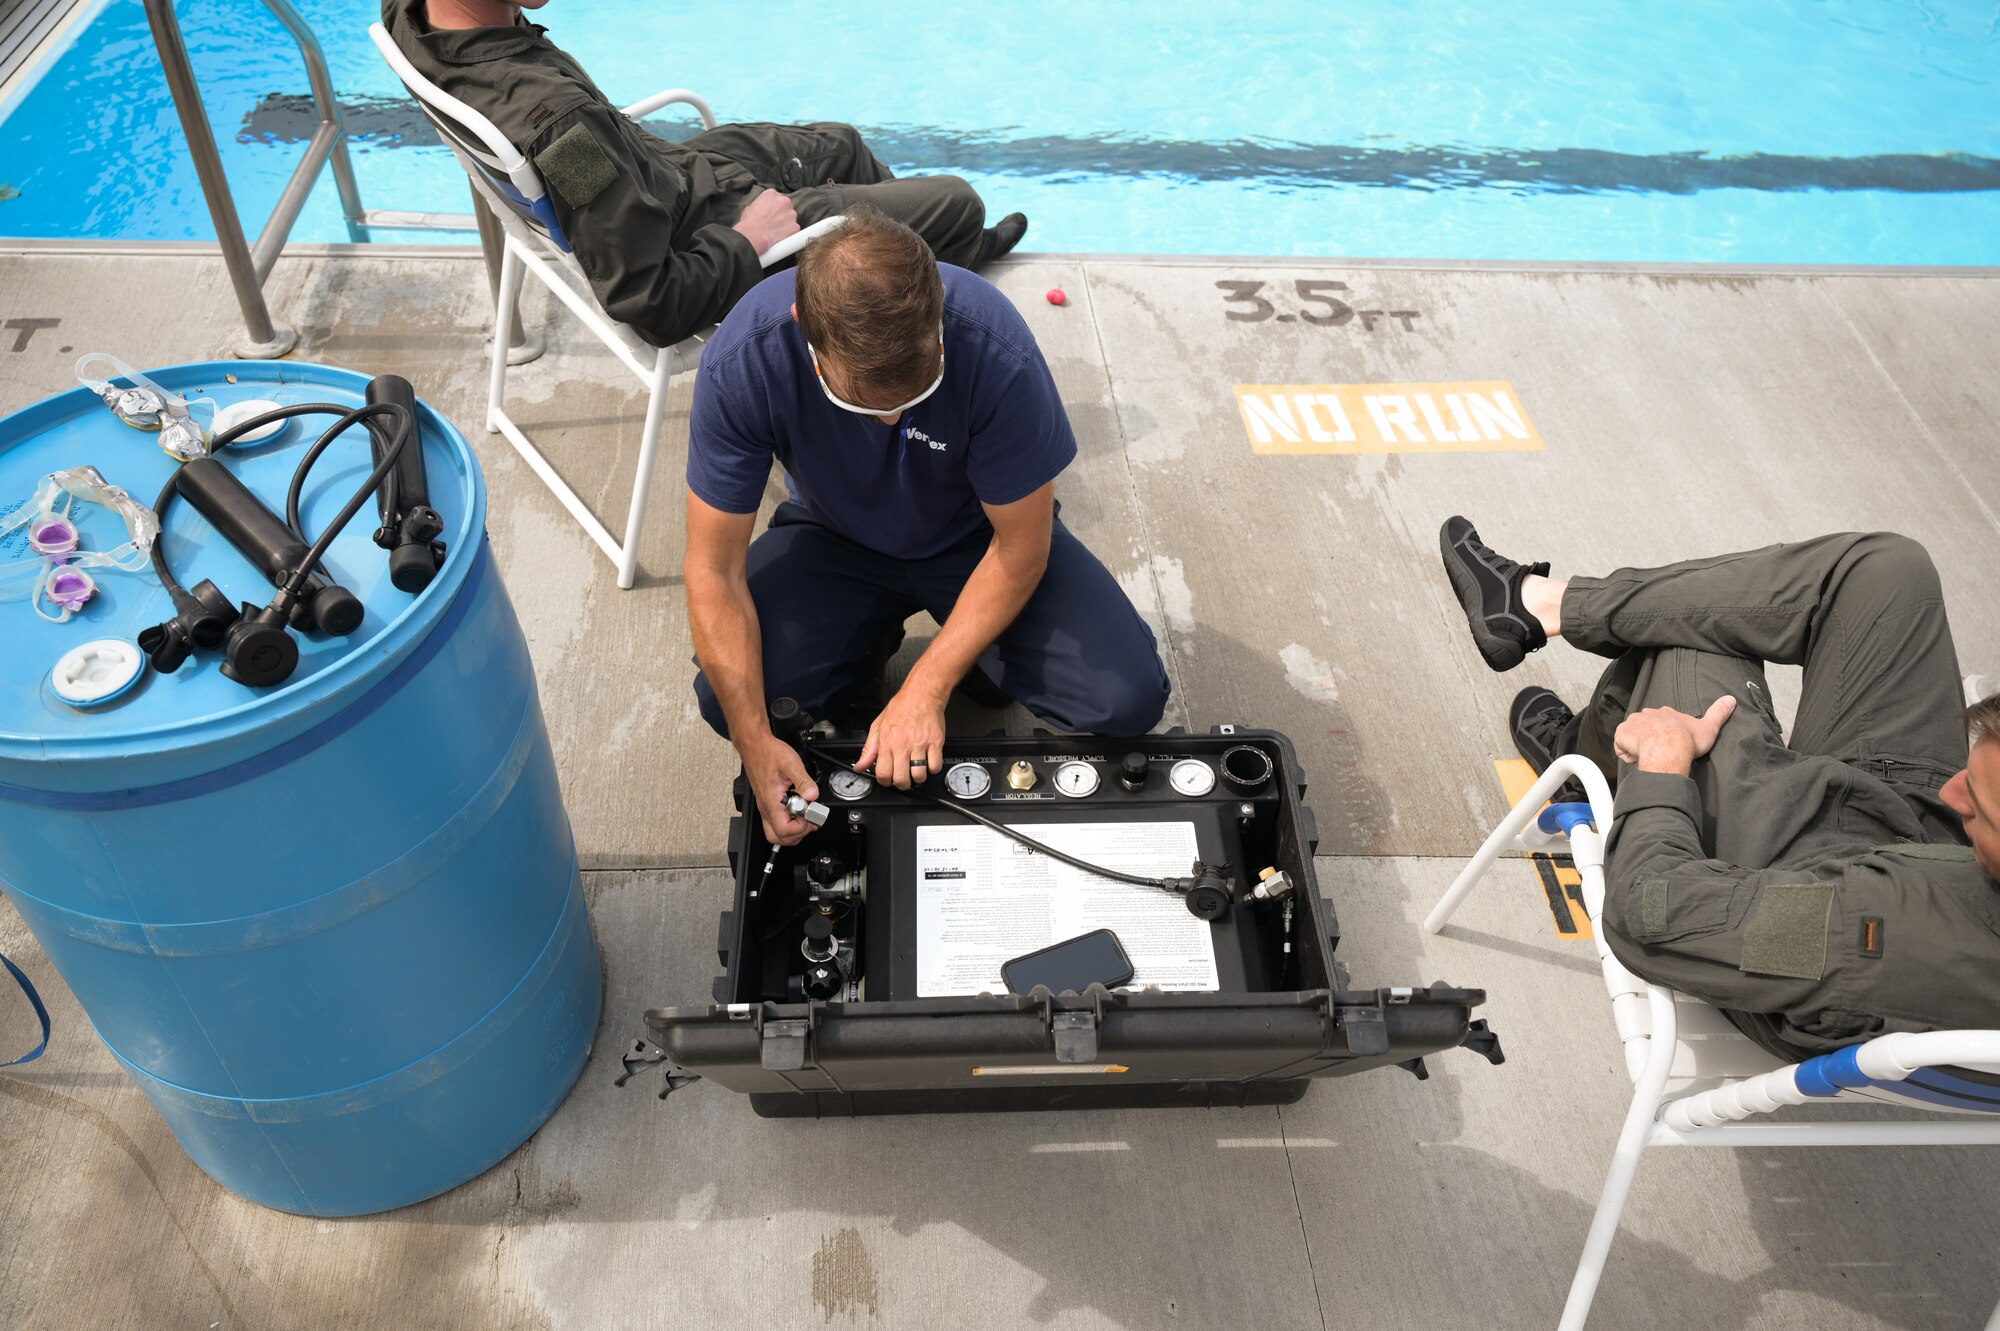 A man leans over a Pelican case to refill cannisters with oxygen.